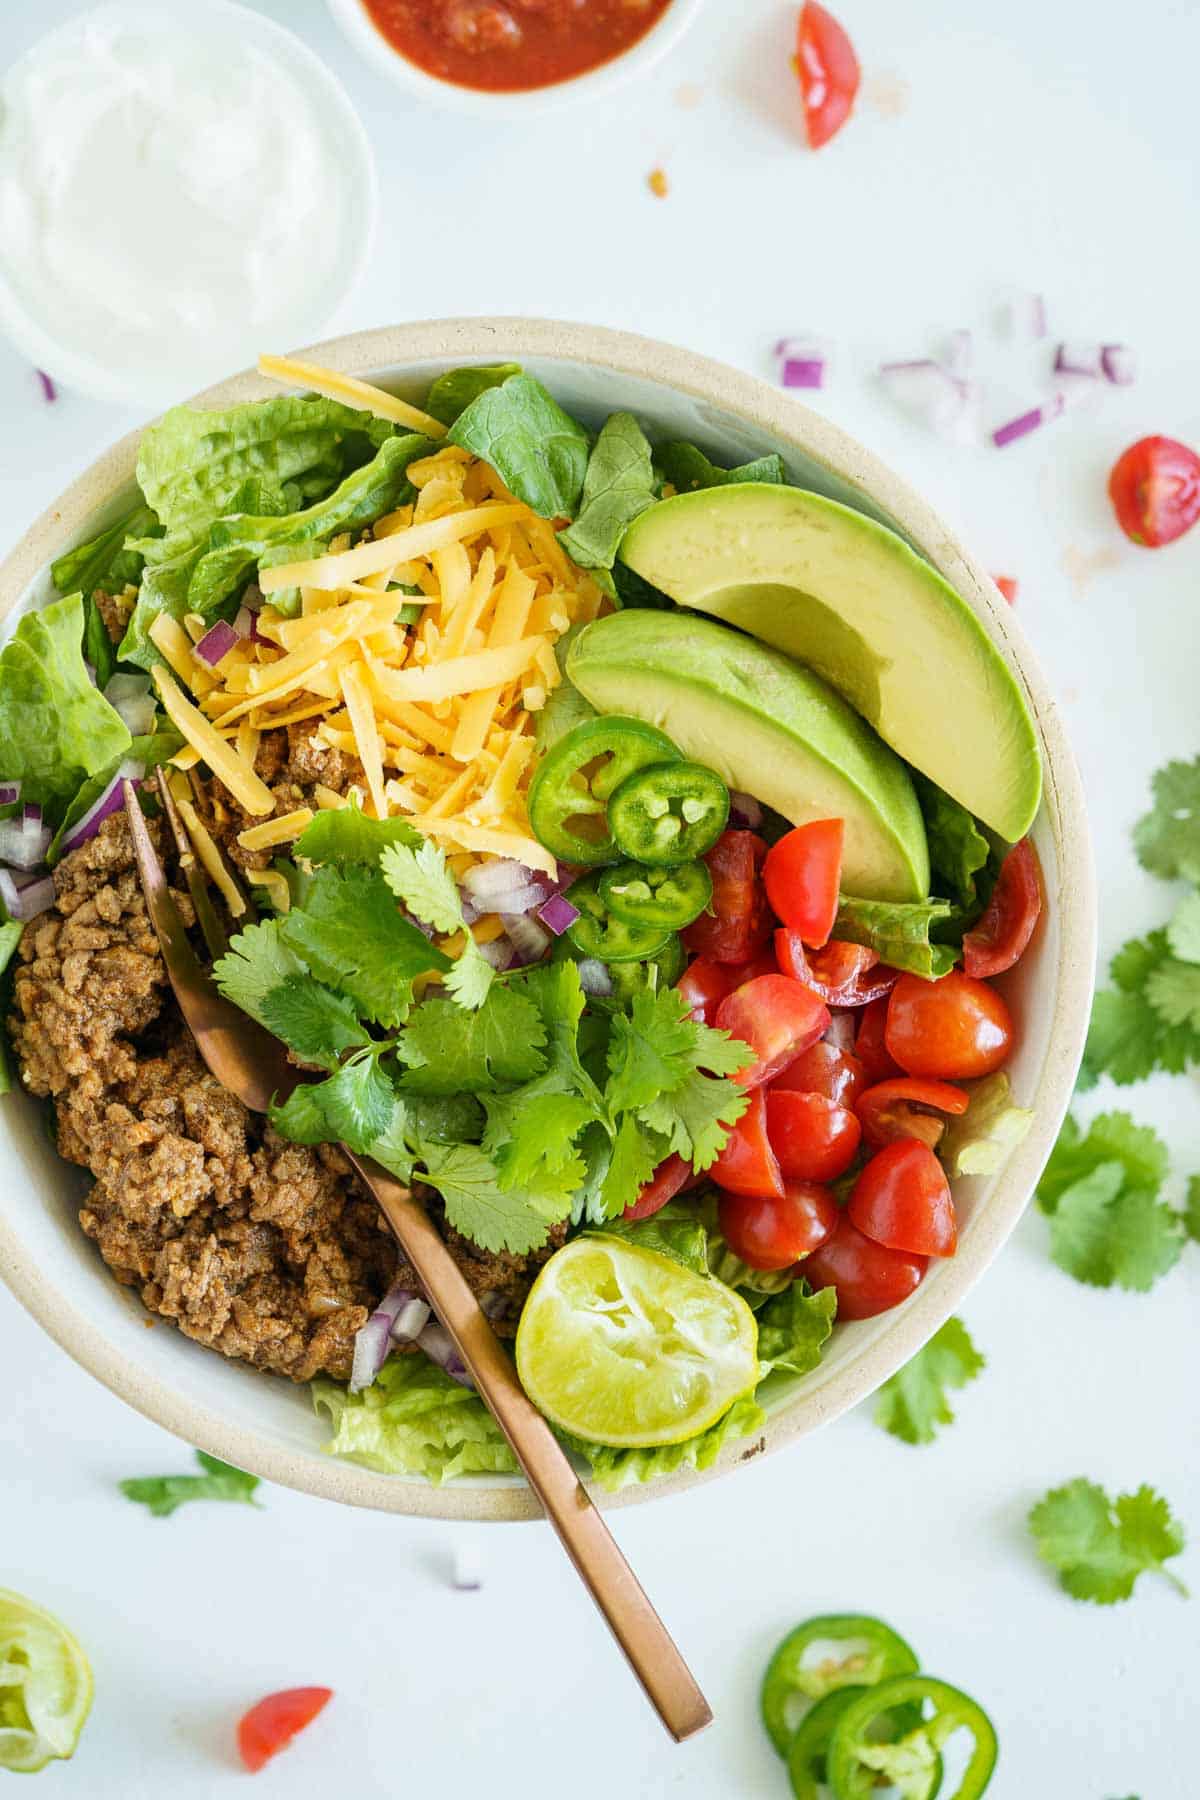 A Keto Taco Bowl on a Kitchen Counter Seen From the Top